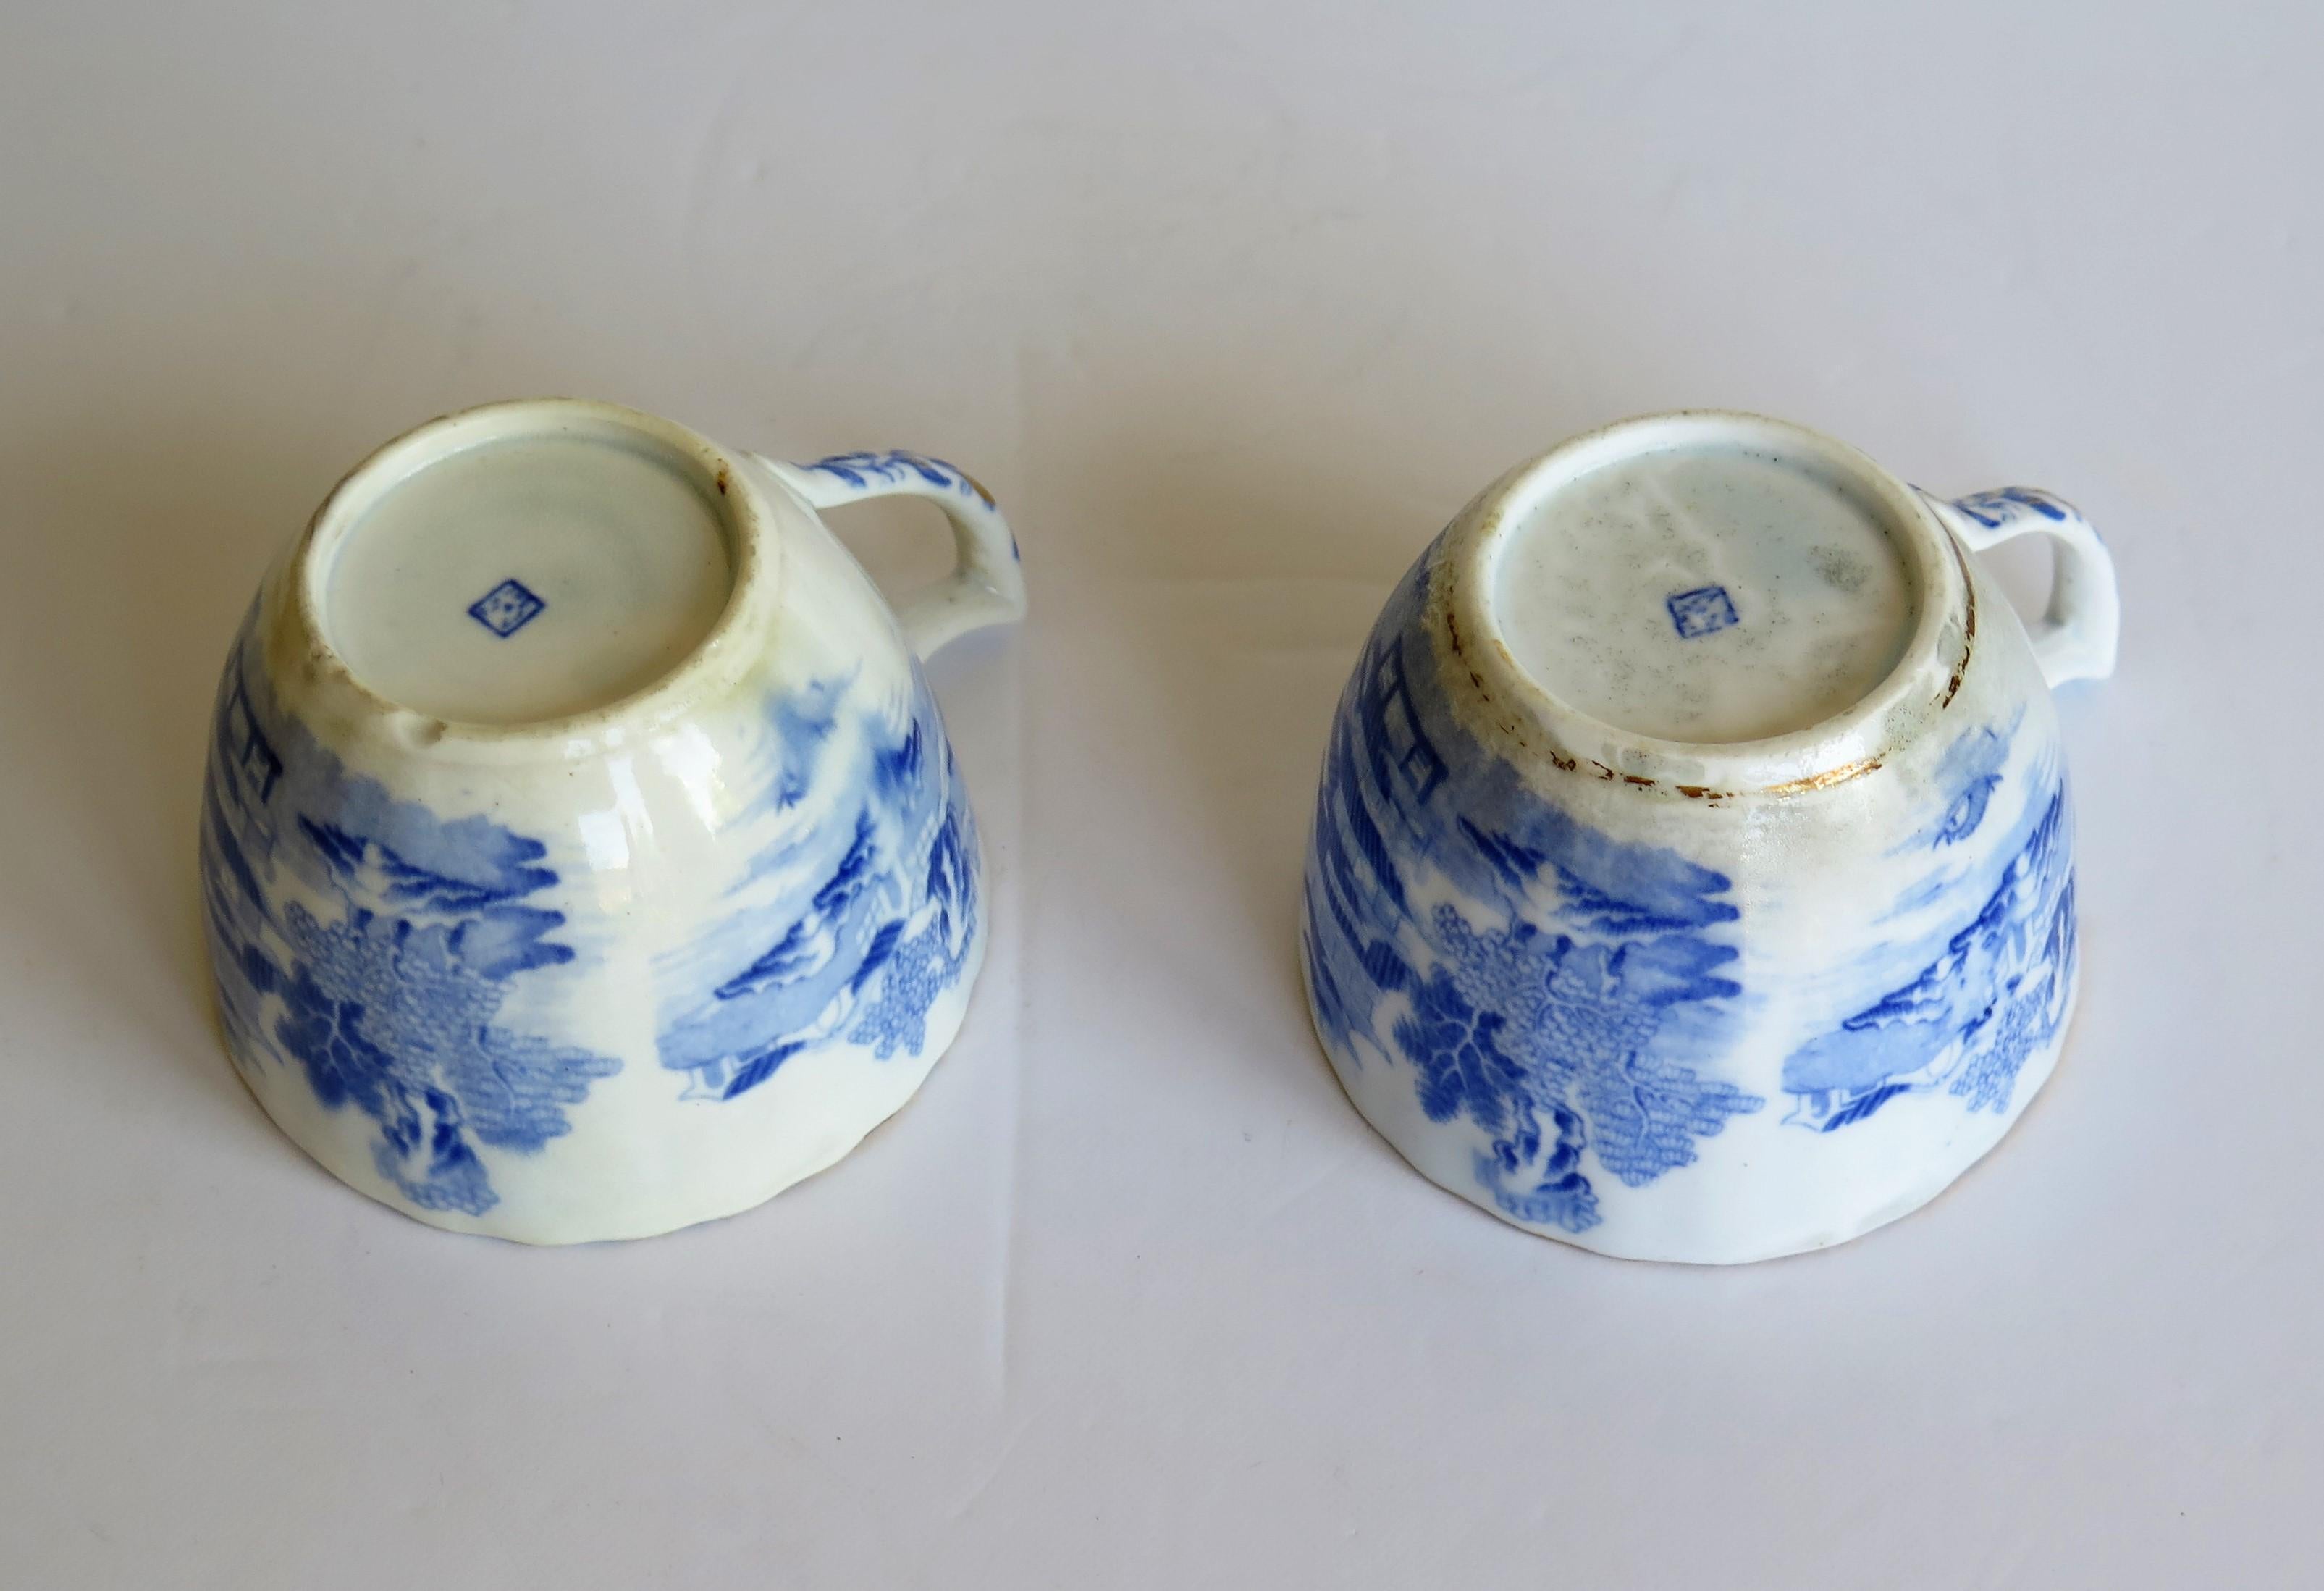 Miles Mason Porcelain Pair of Tea Cups Broseley Blue and White Pattern, Ca. 1805 For Sale 8